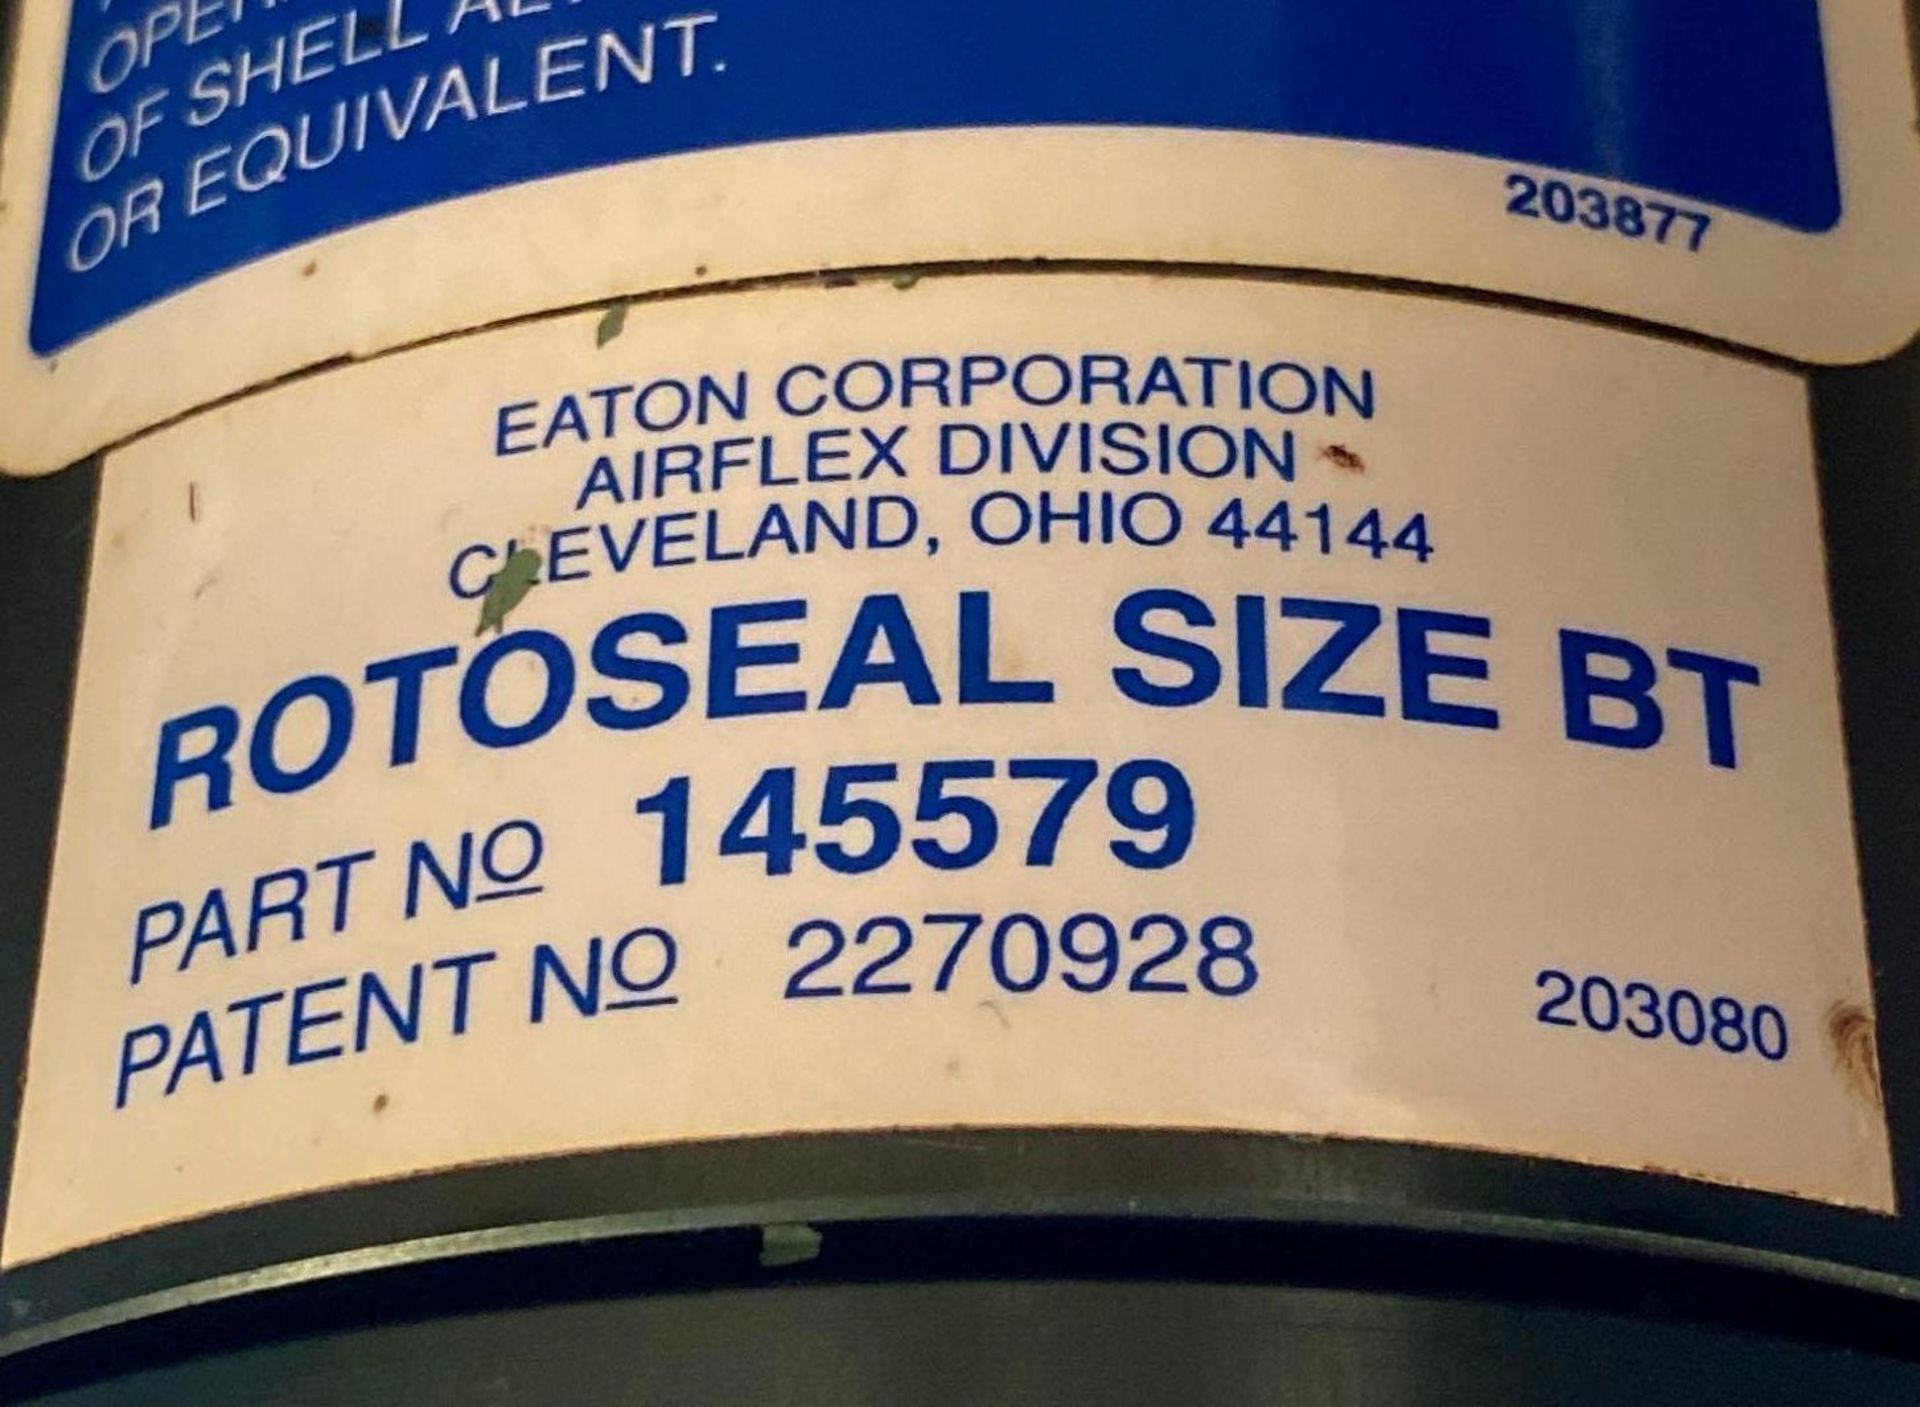 Rotoseal Size BT - Image 2 of 4